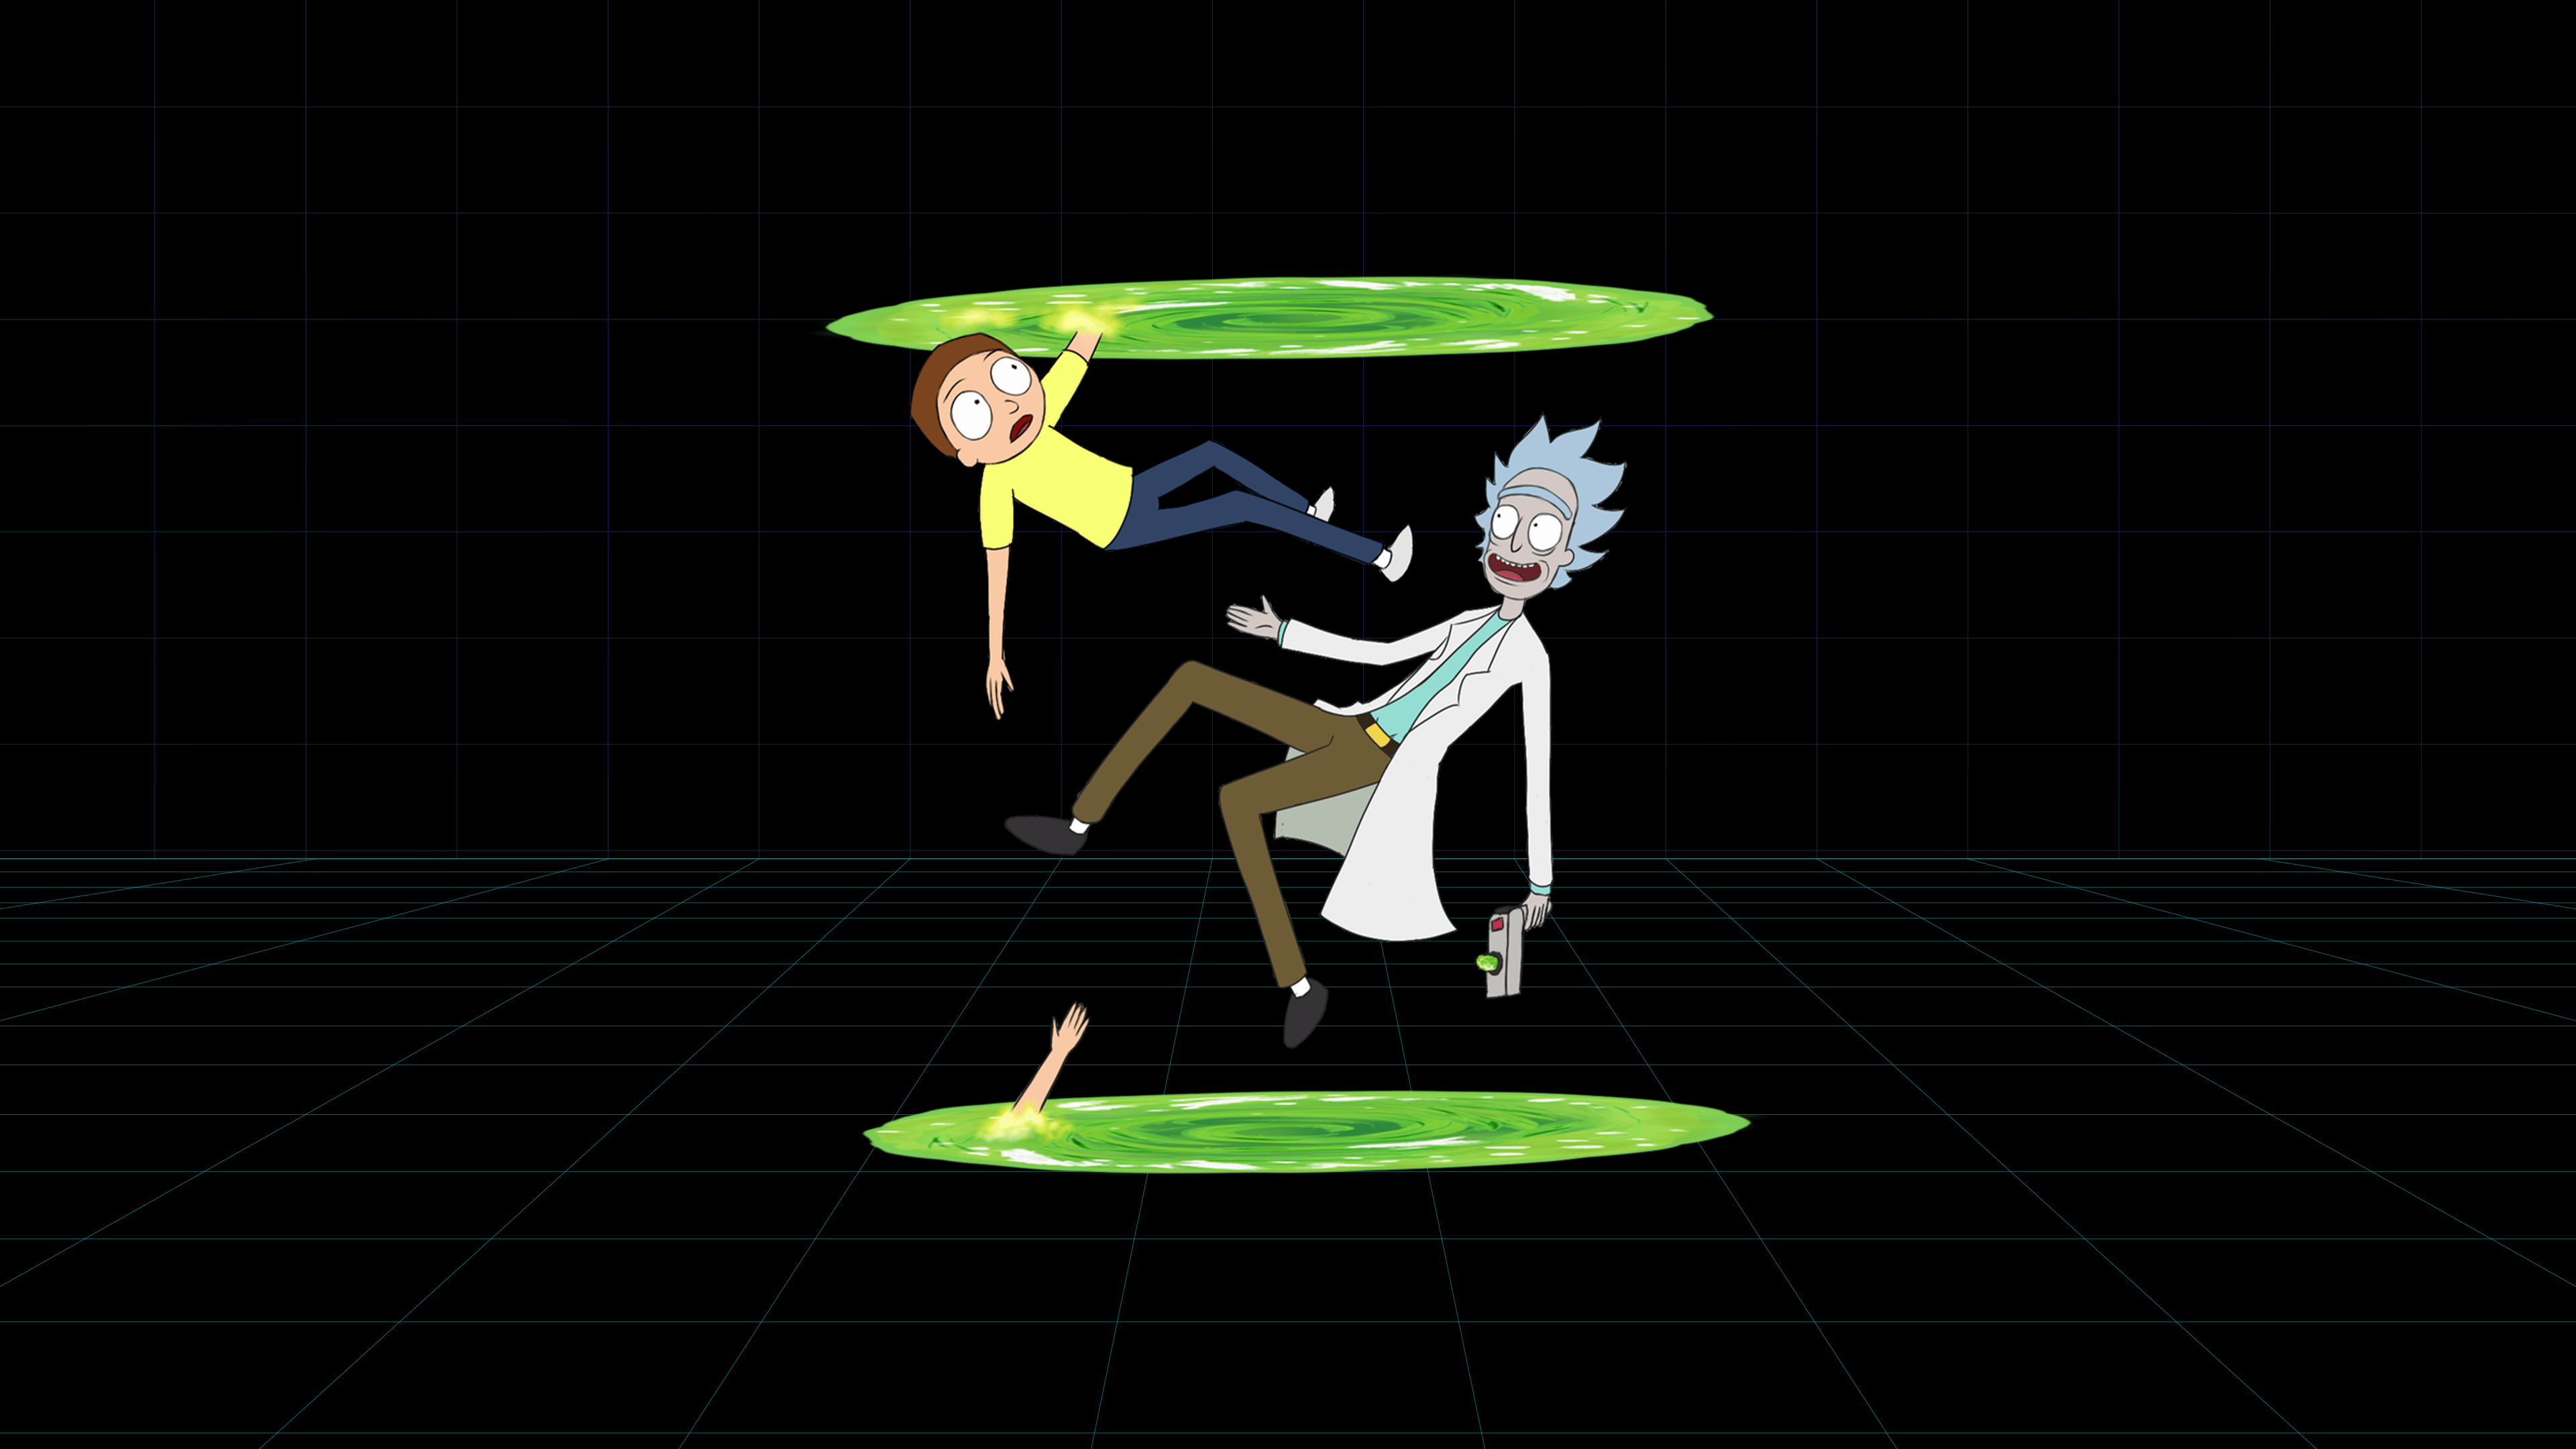 328936 Rick and Morty Portal 4k  Rare Gallery HD Wallpapers